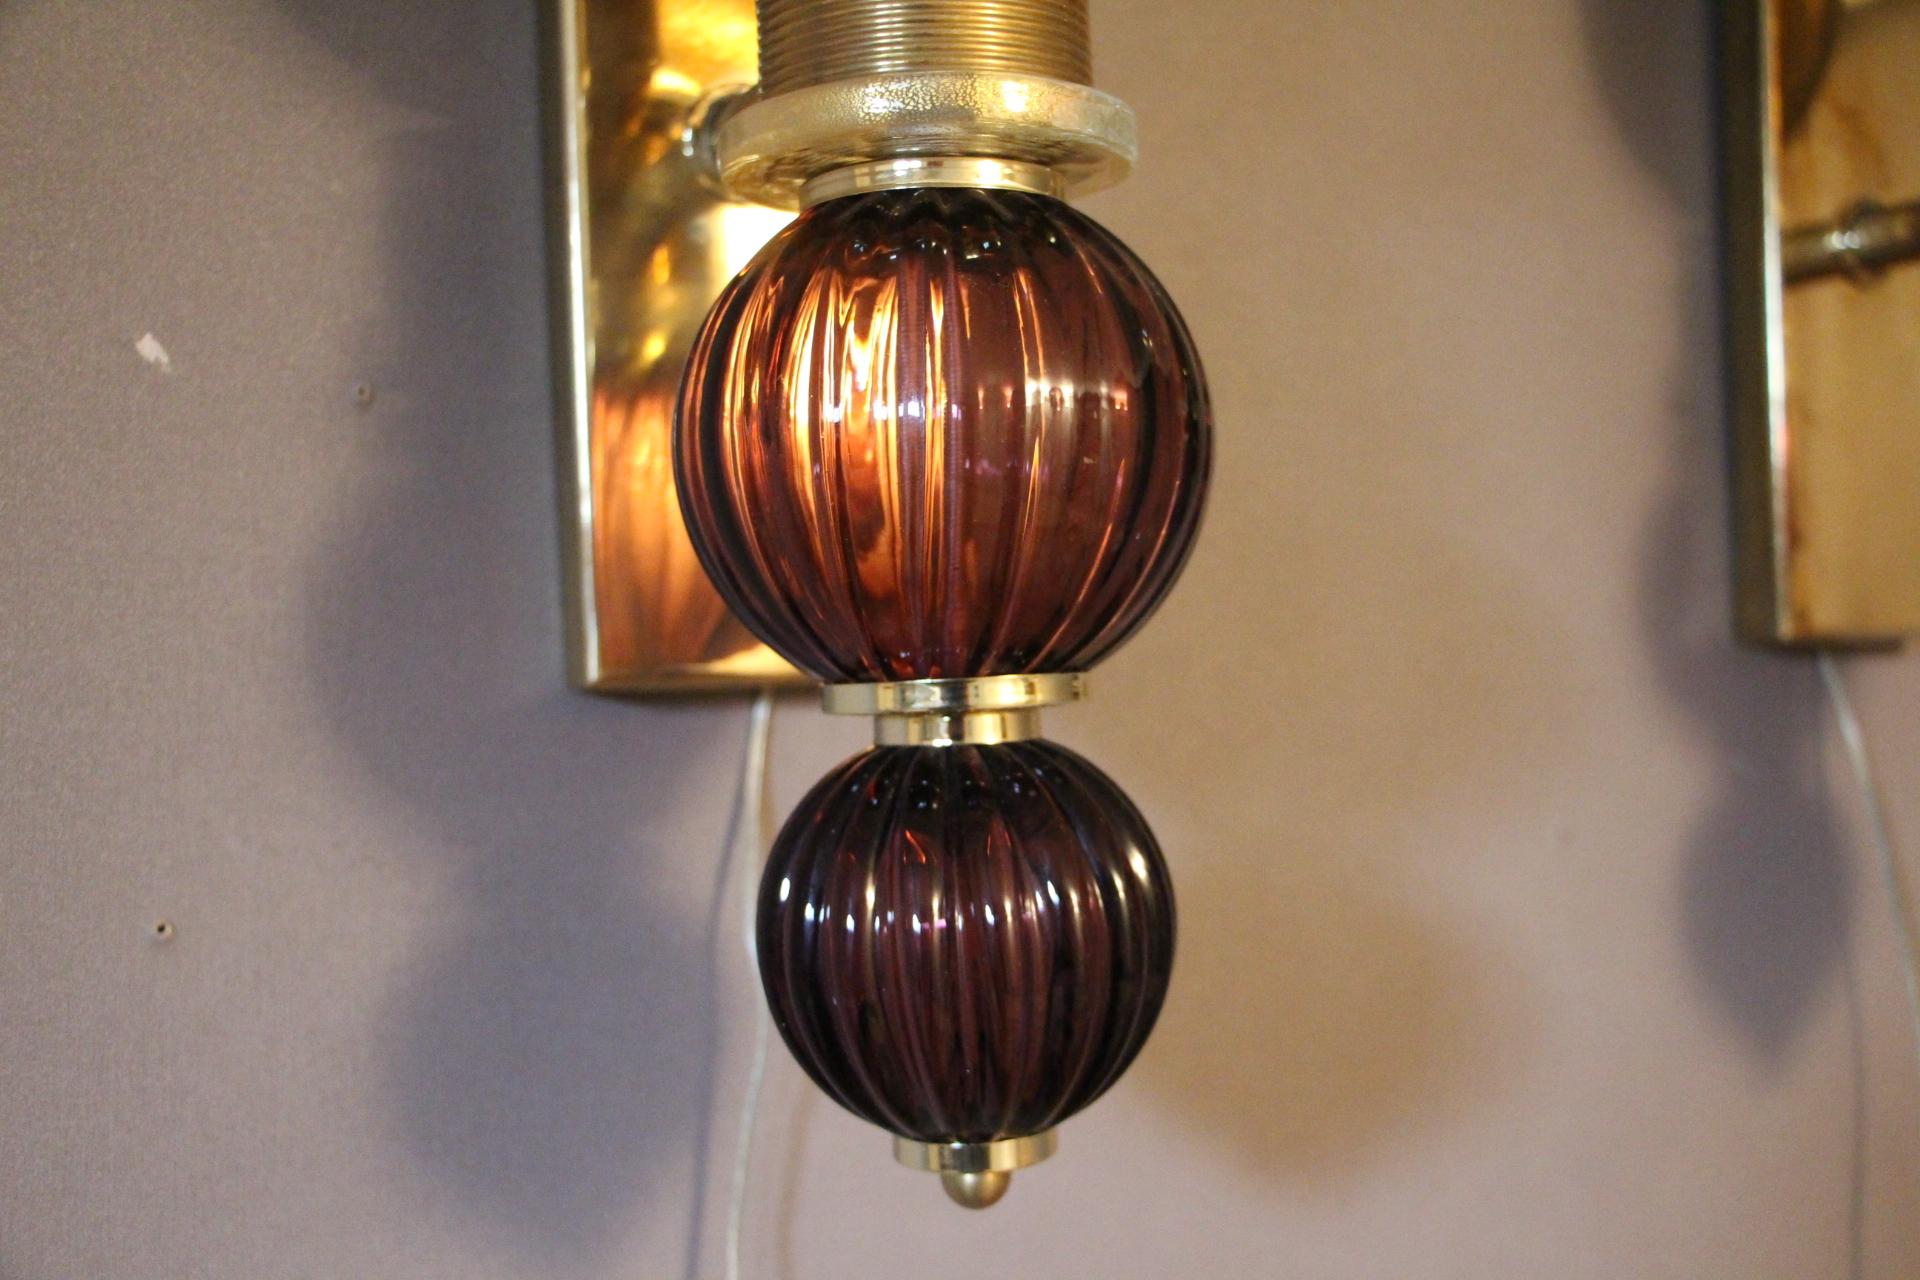 Superb pair of sconces made in brass, two purple Murano glass globes, amethyst color and a golden mercerized Murano glass globe.
 